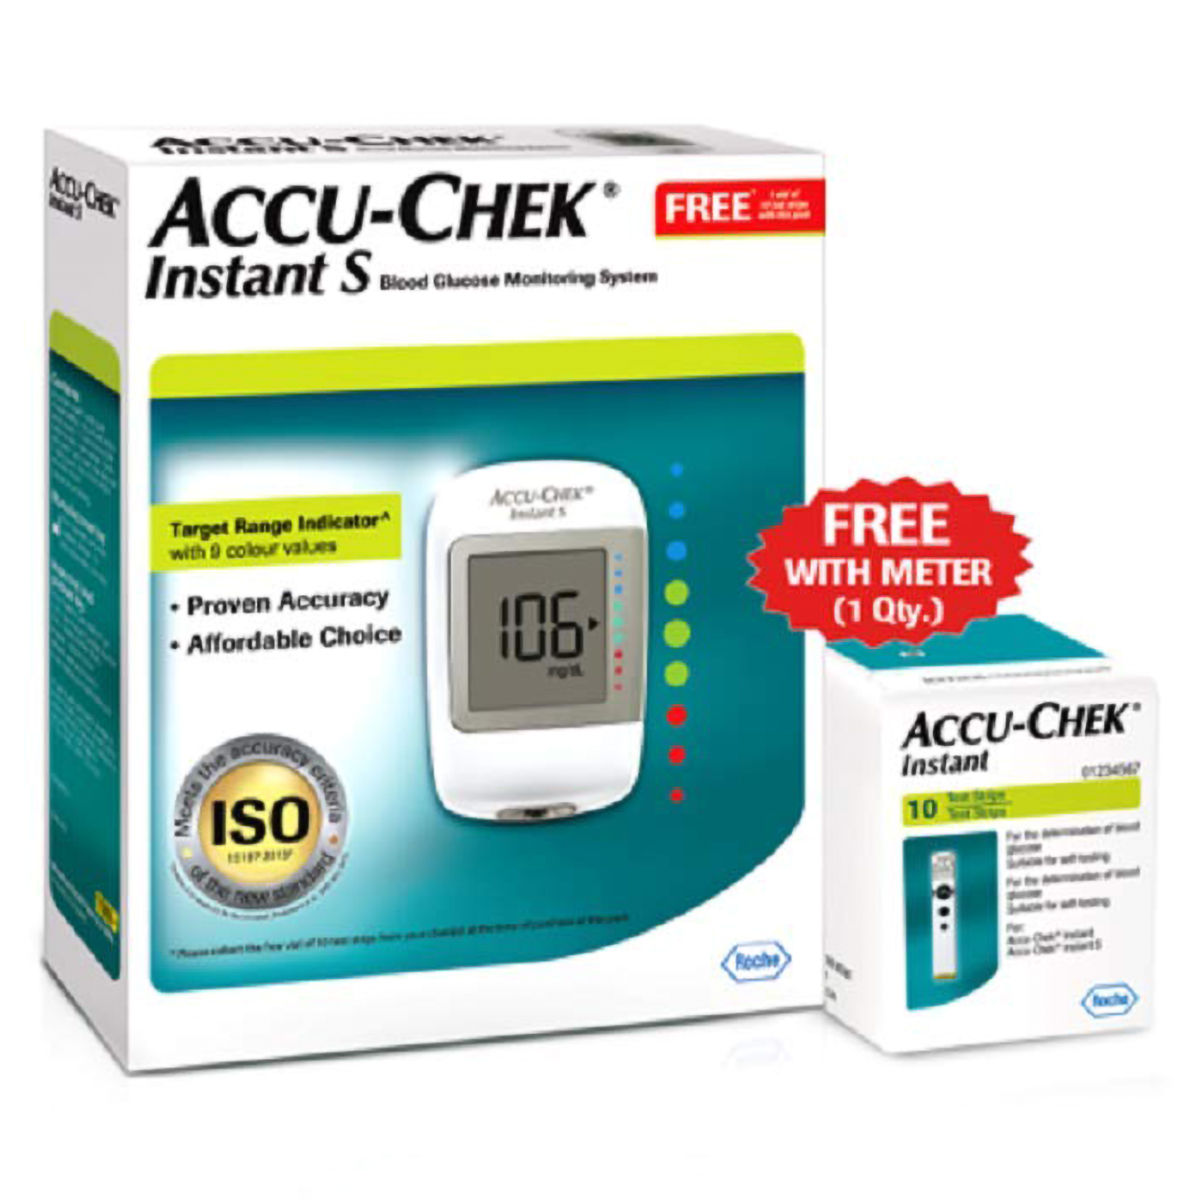 Accu-Chek Instant S Blood Glucose Monitoring System With 10 Free Test Strips, 1 Kit Price, Uses, Side Effects, Composition Apollo Pharmacy